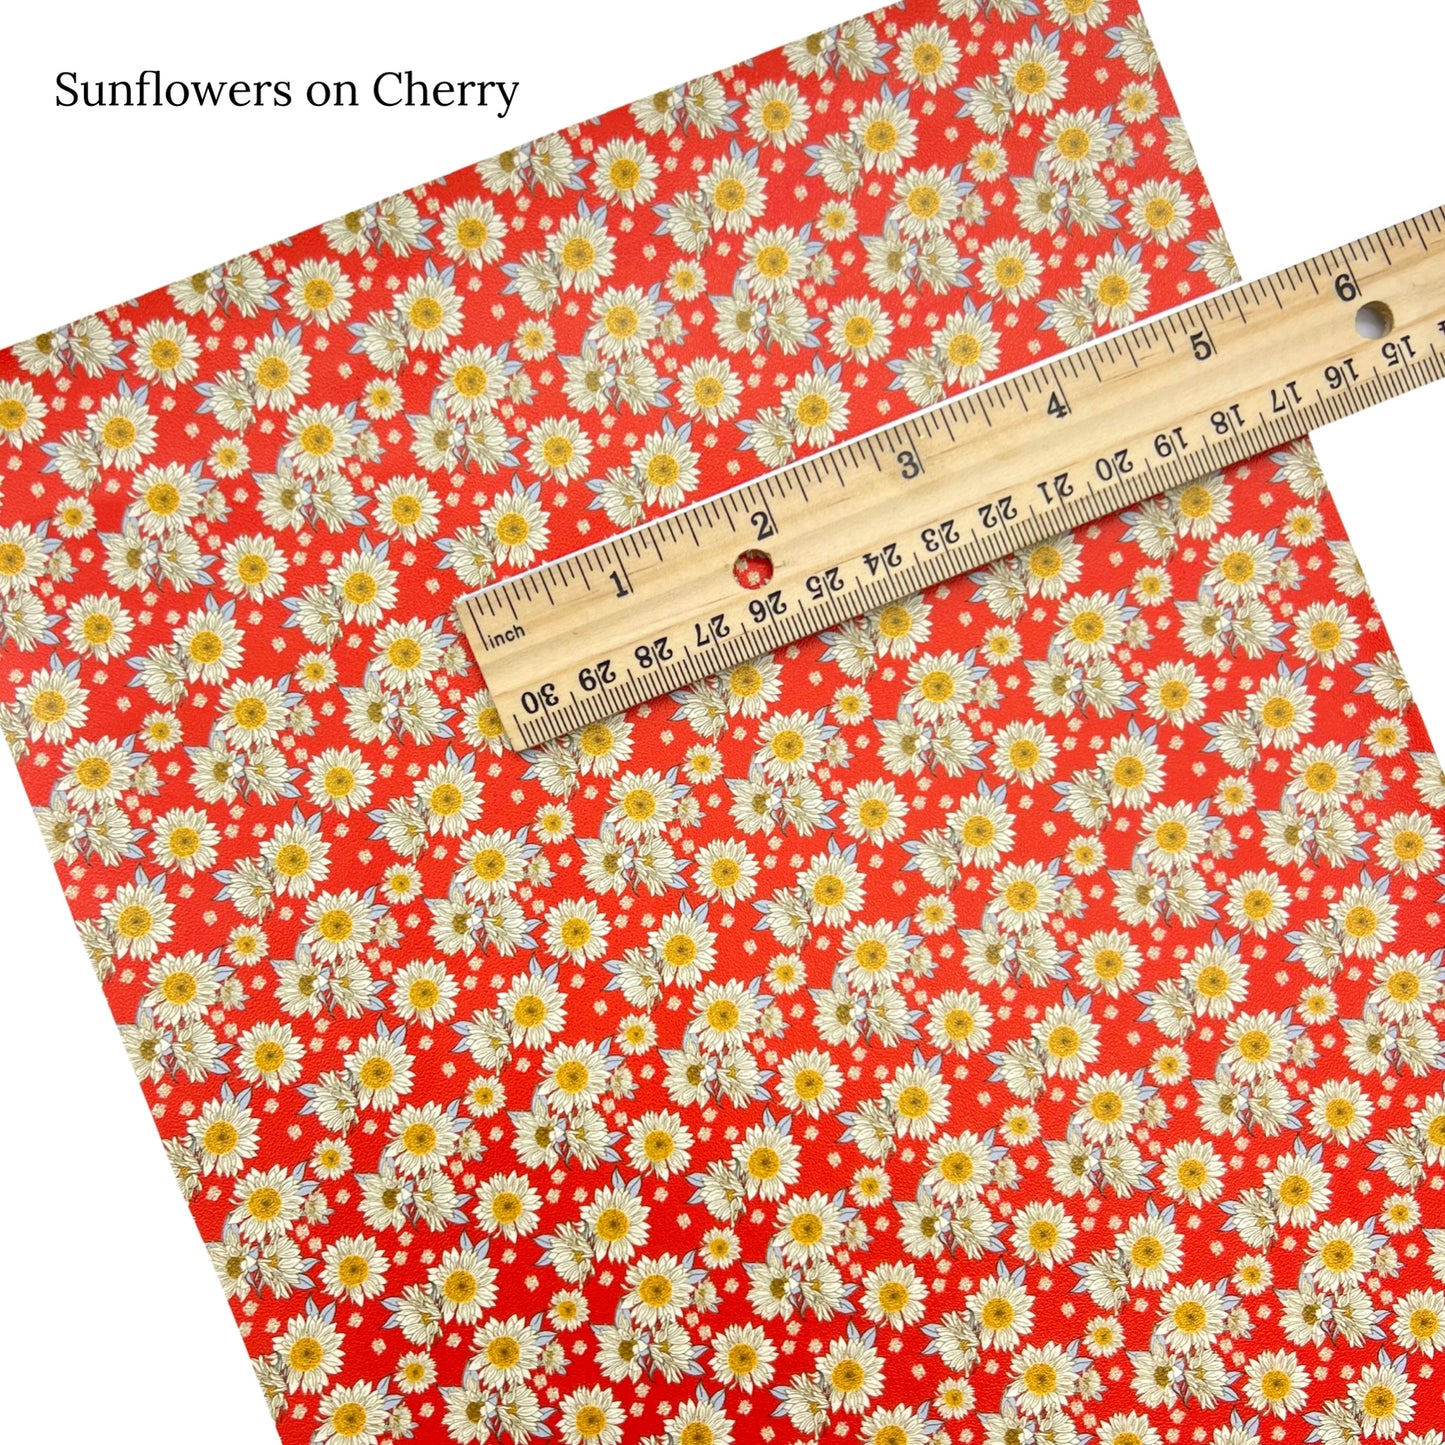 Sunflower clusters on cherry red faux leather sheet.